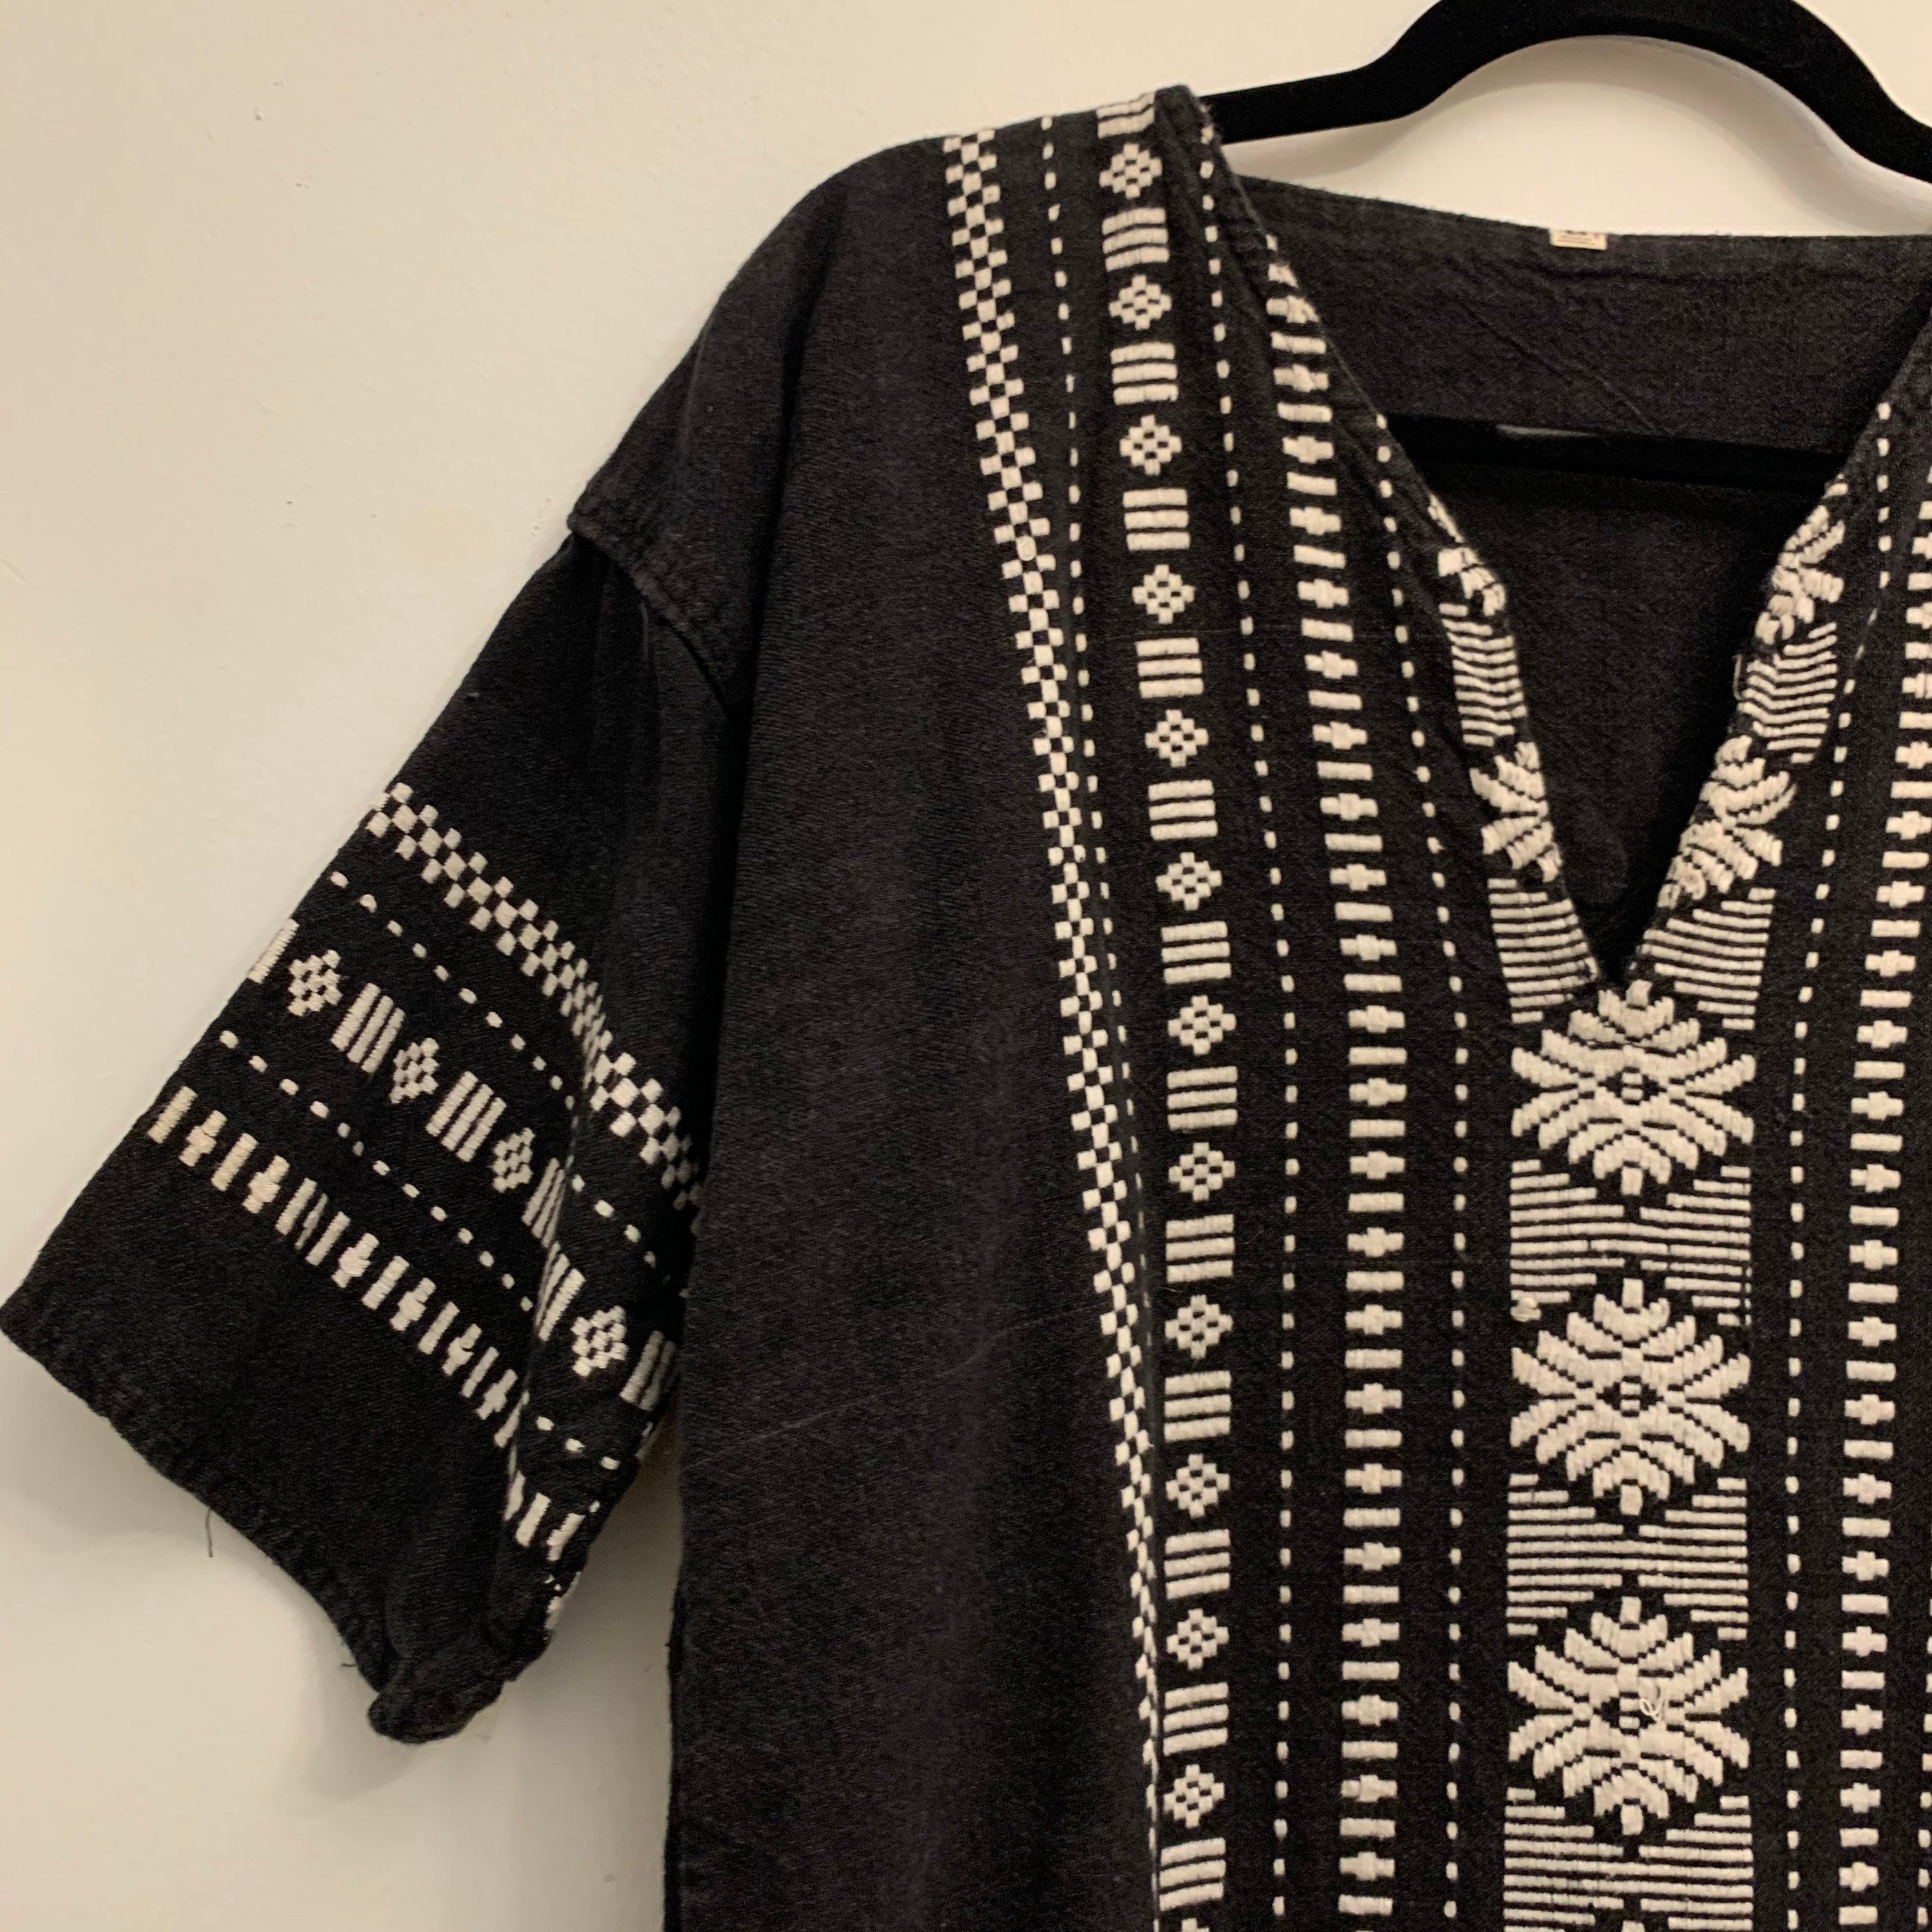 Vintage Black and White Guatemalan Short Sleeve Top | Shop THRILLING